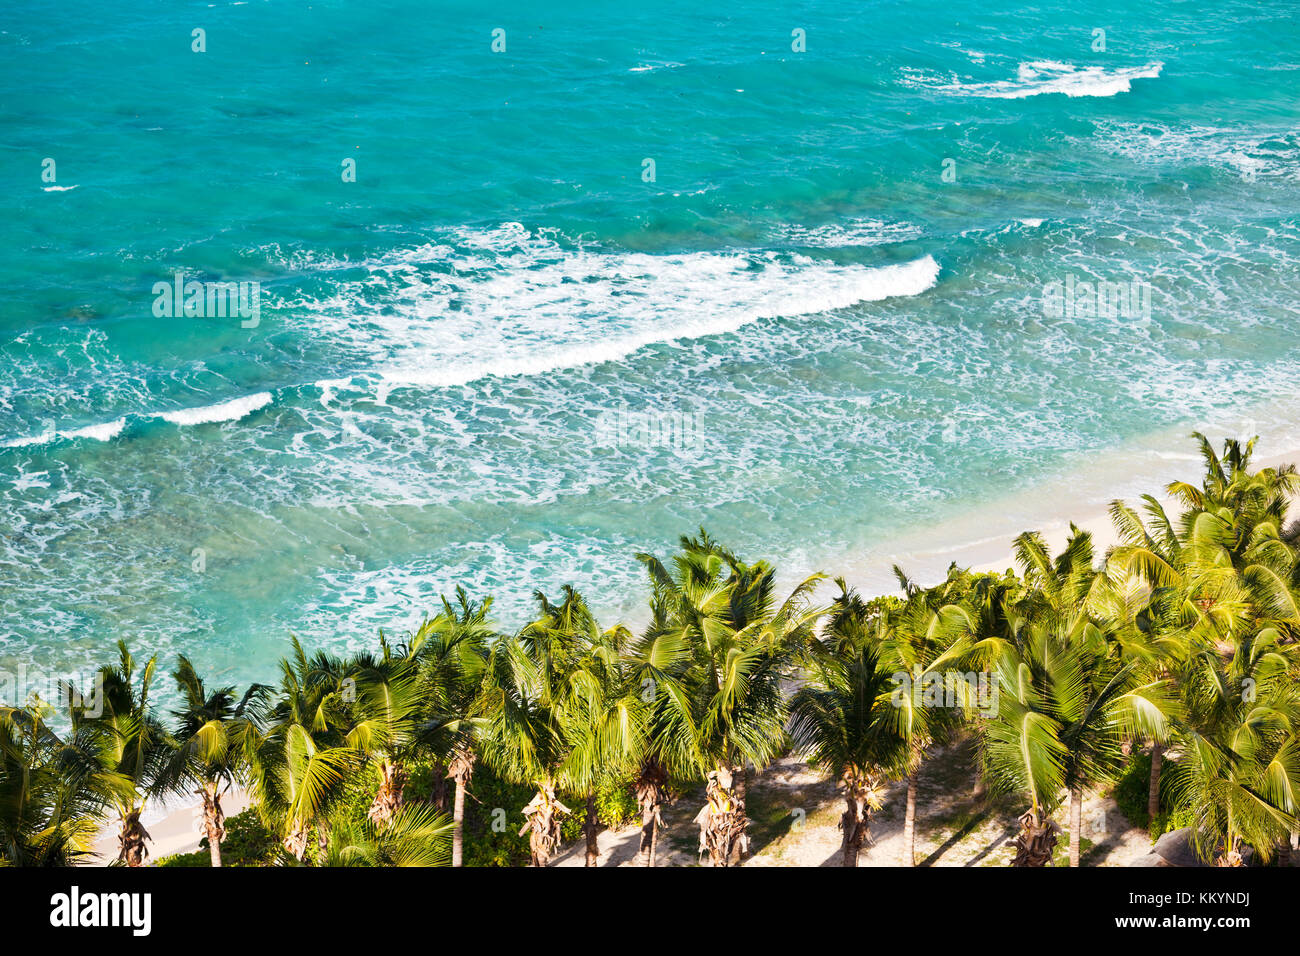 A beautiful caribbean beach with lots of palm trees and tall waves seen from a high observation point. Galley Bay, Antigua. Stock Photo